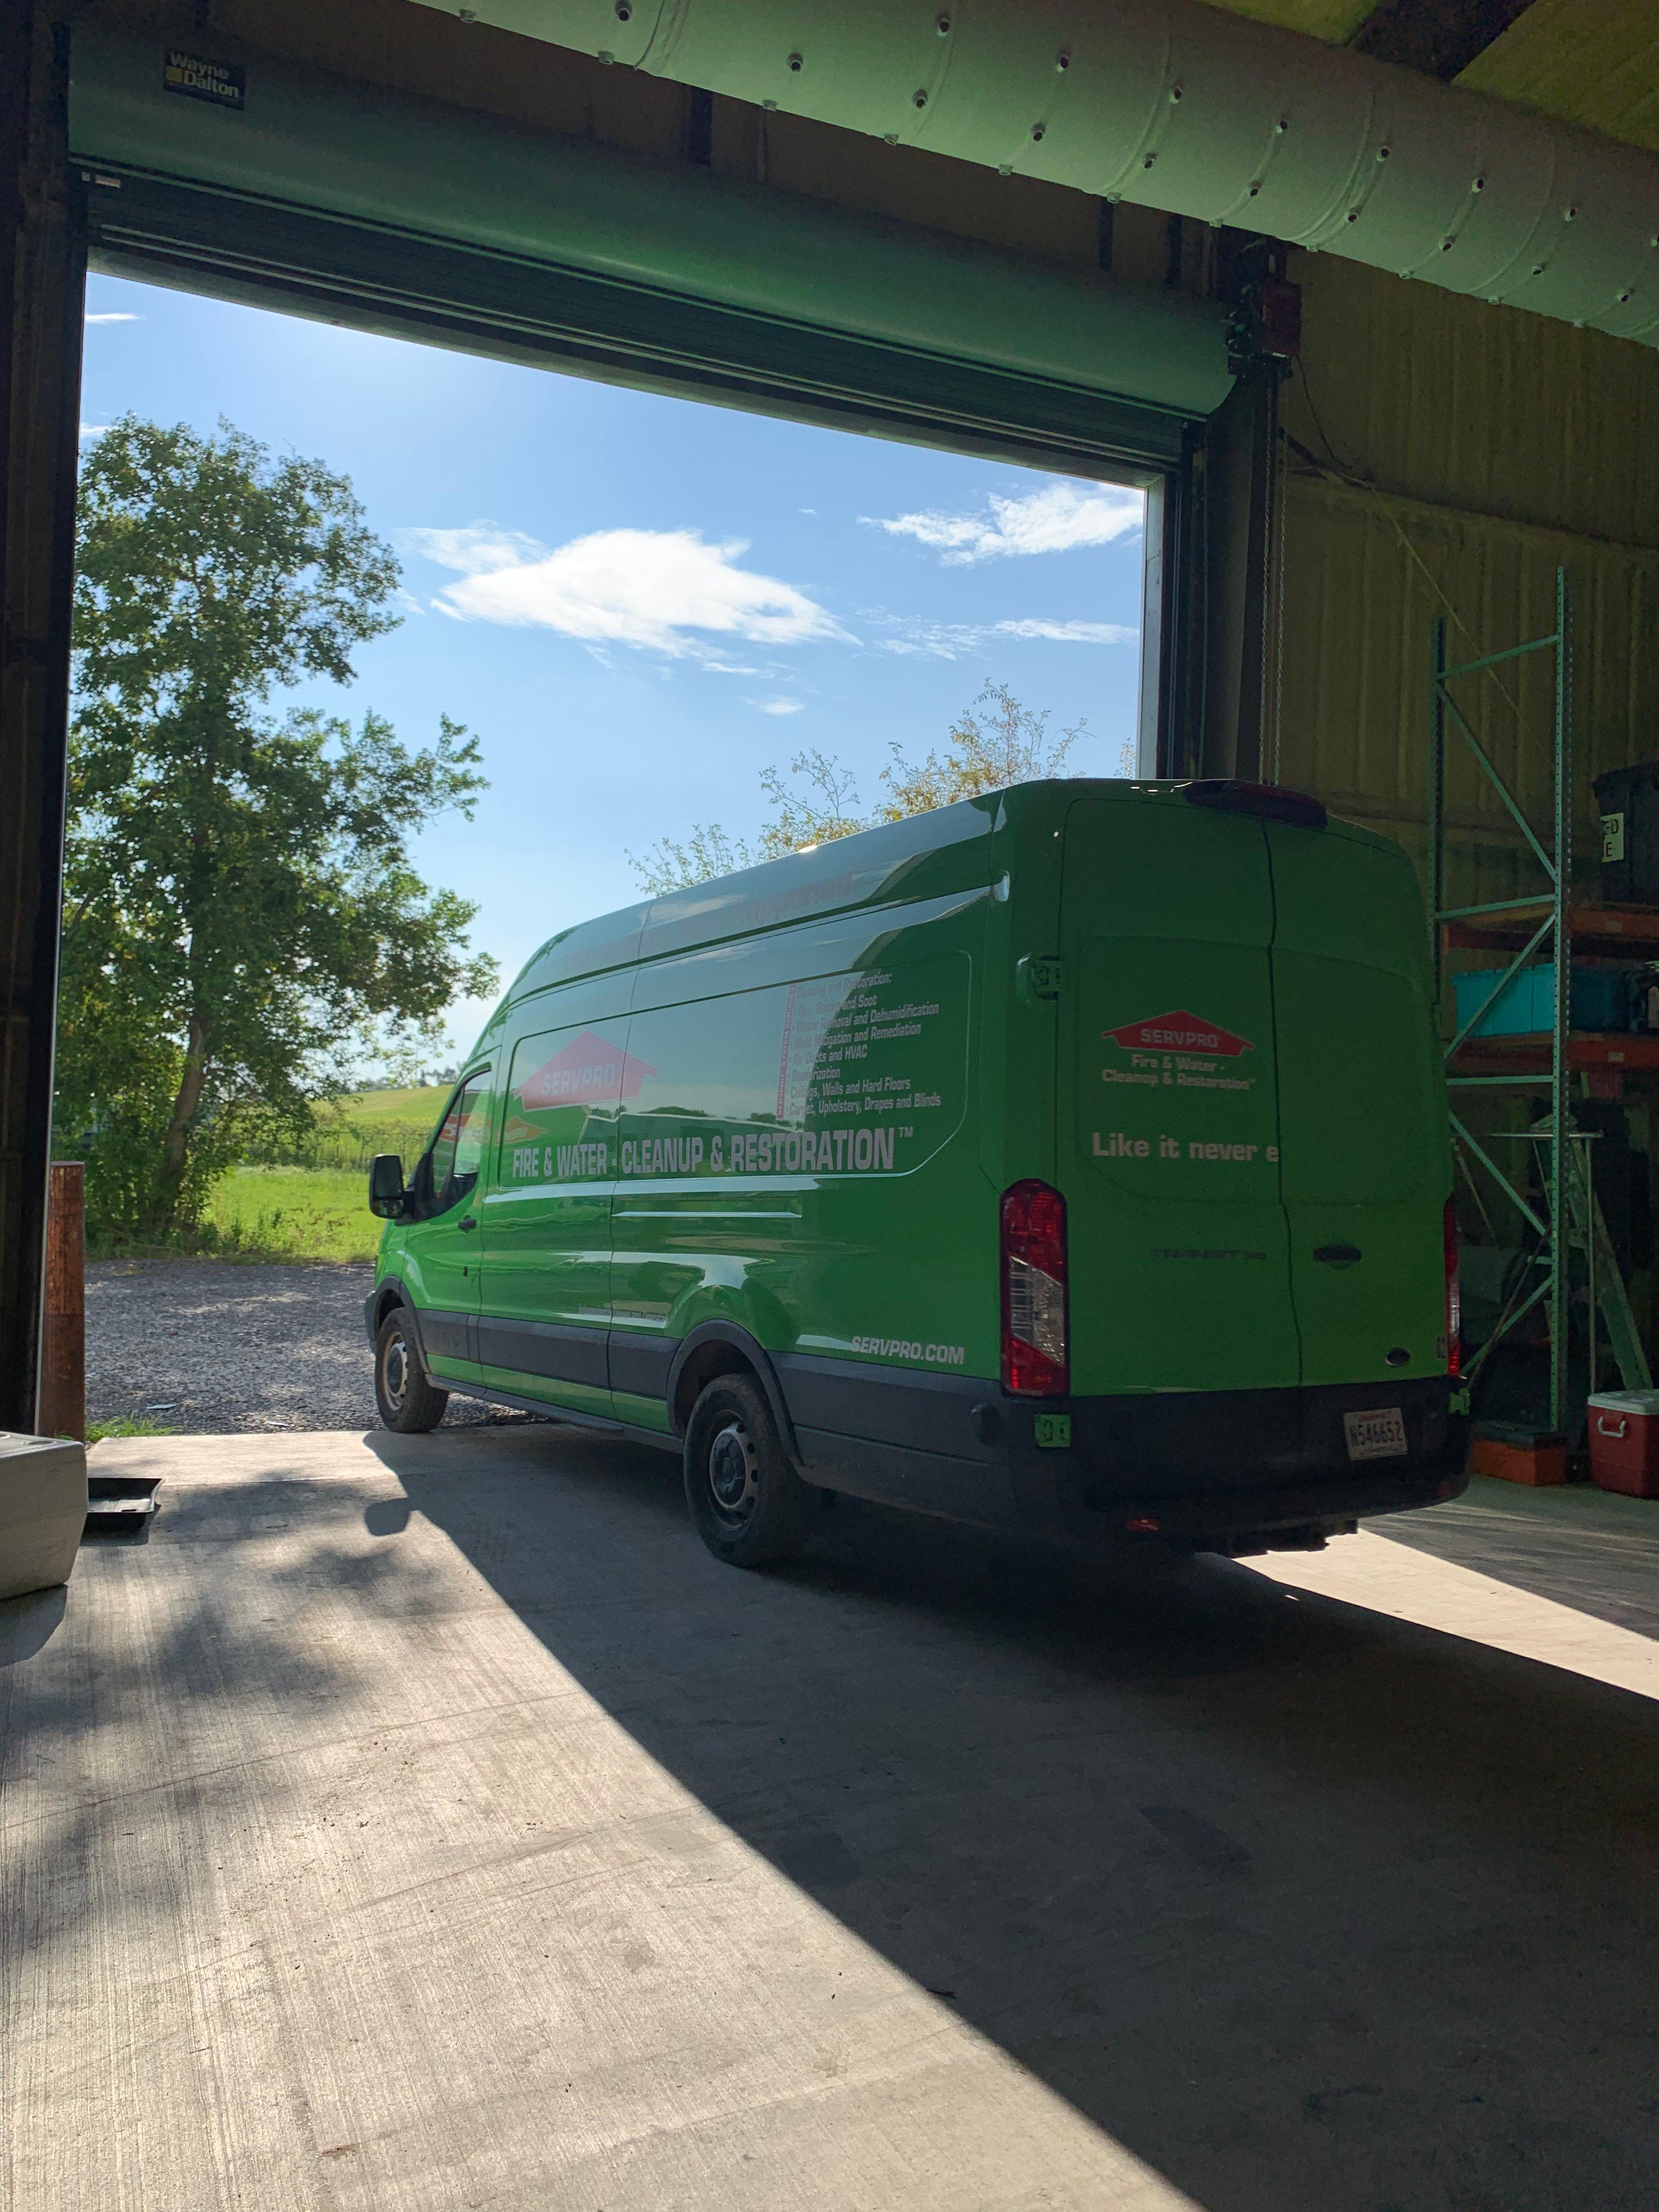 Loading the SERVPRO van for an early morning job.